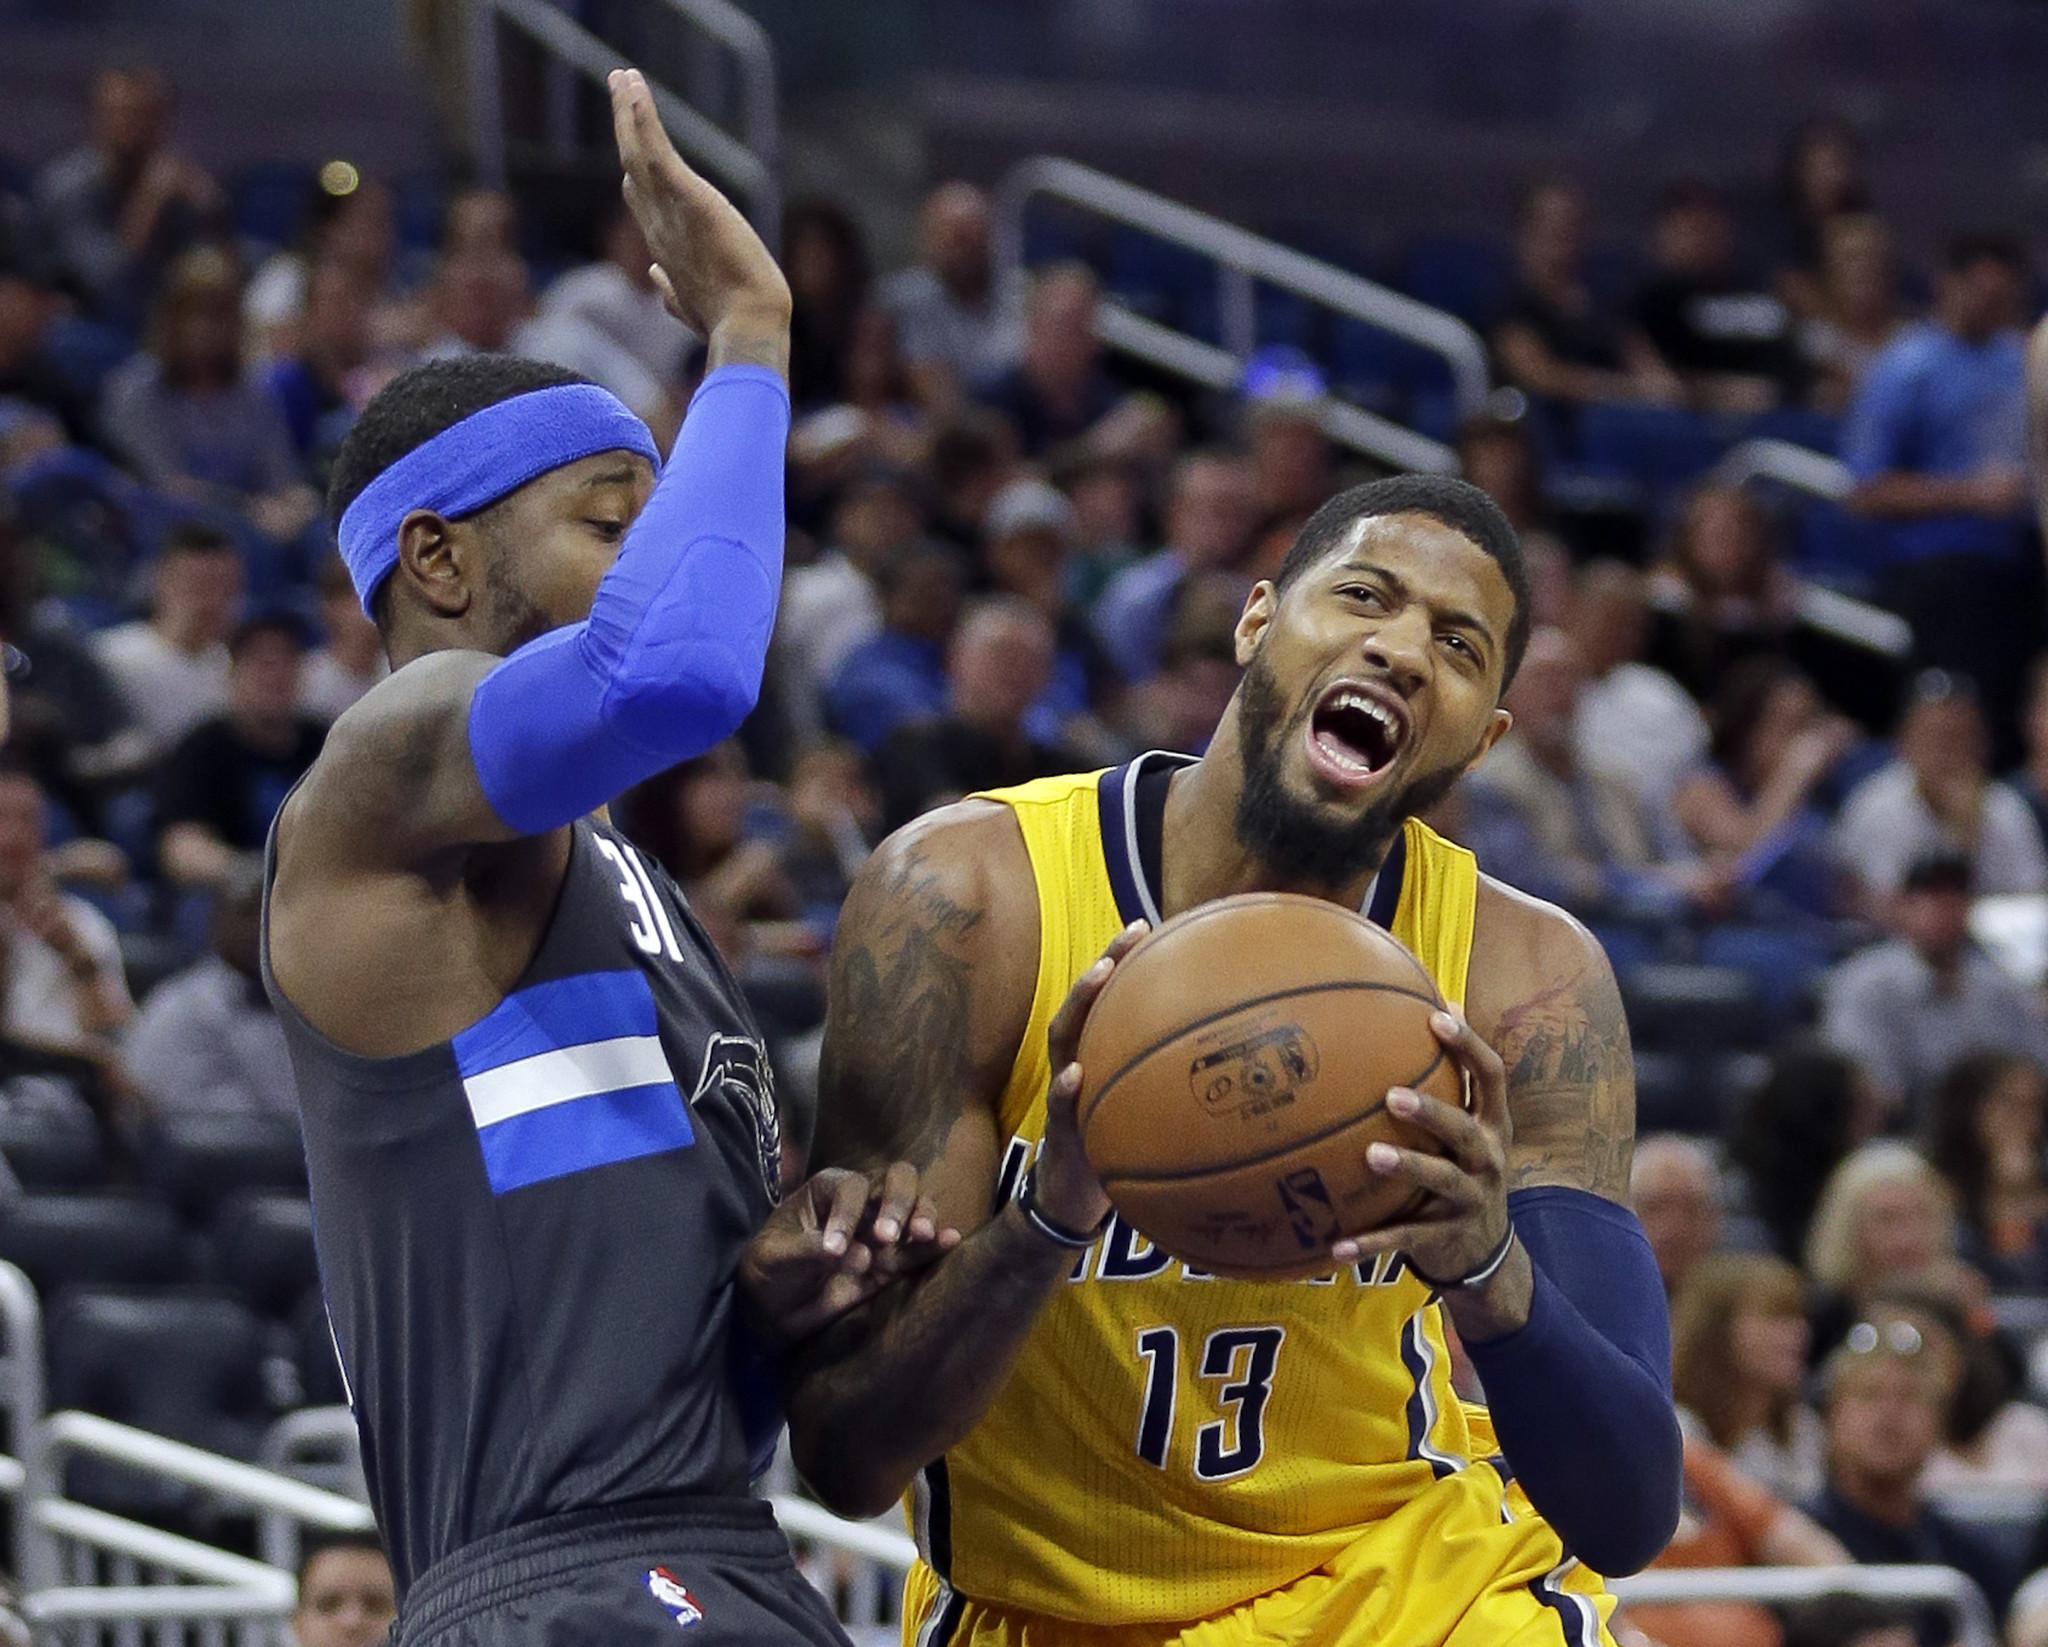 Secret's out: Paul George plans to leave Indiana, and where he lands could reshape the NBA